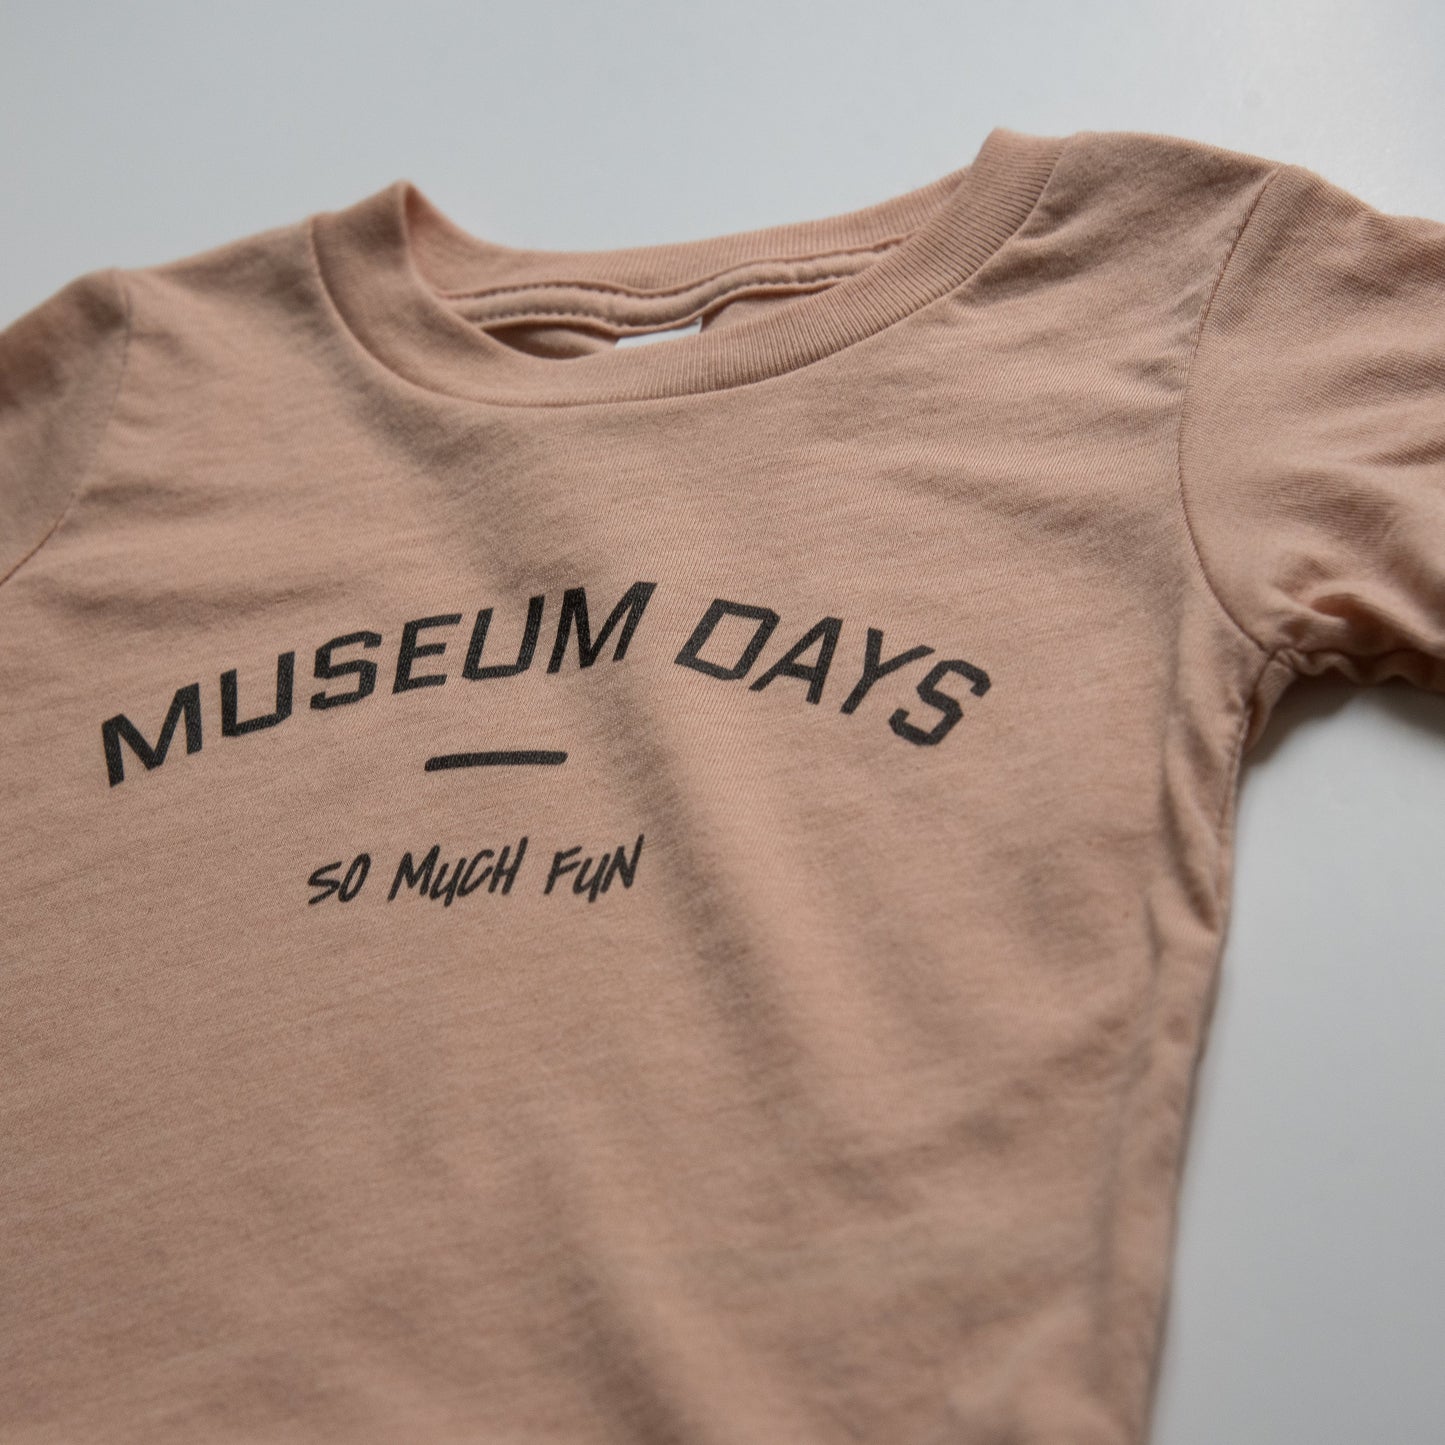 MUSEUM DAYS SO MUCH FUN - Short Sleeve Youth Tee - 2 COLORS! - Little Mate Adventures 